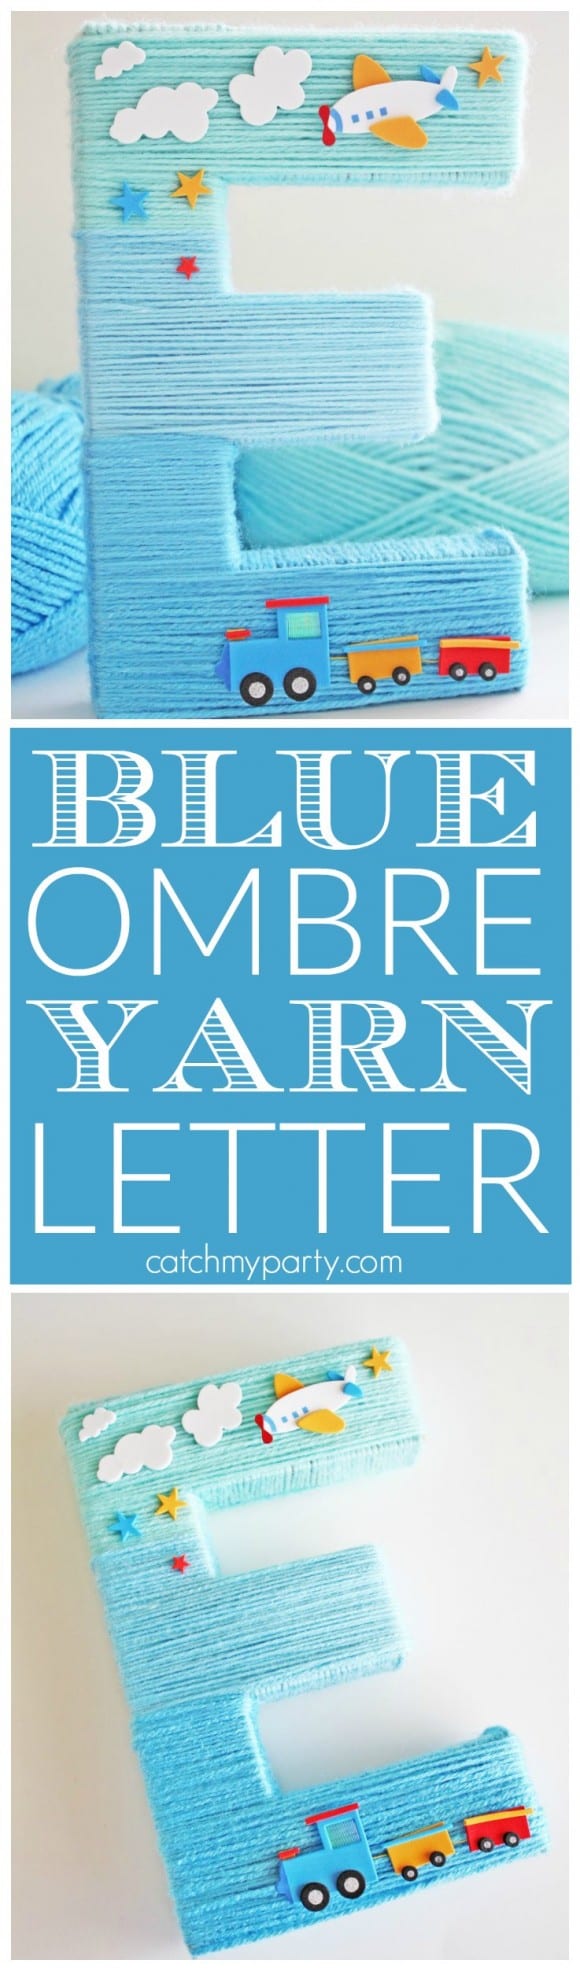 Blue Yarn Wrapped Ombre Monogram Letter | CatchMyParty.com